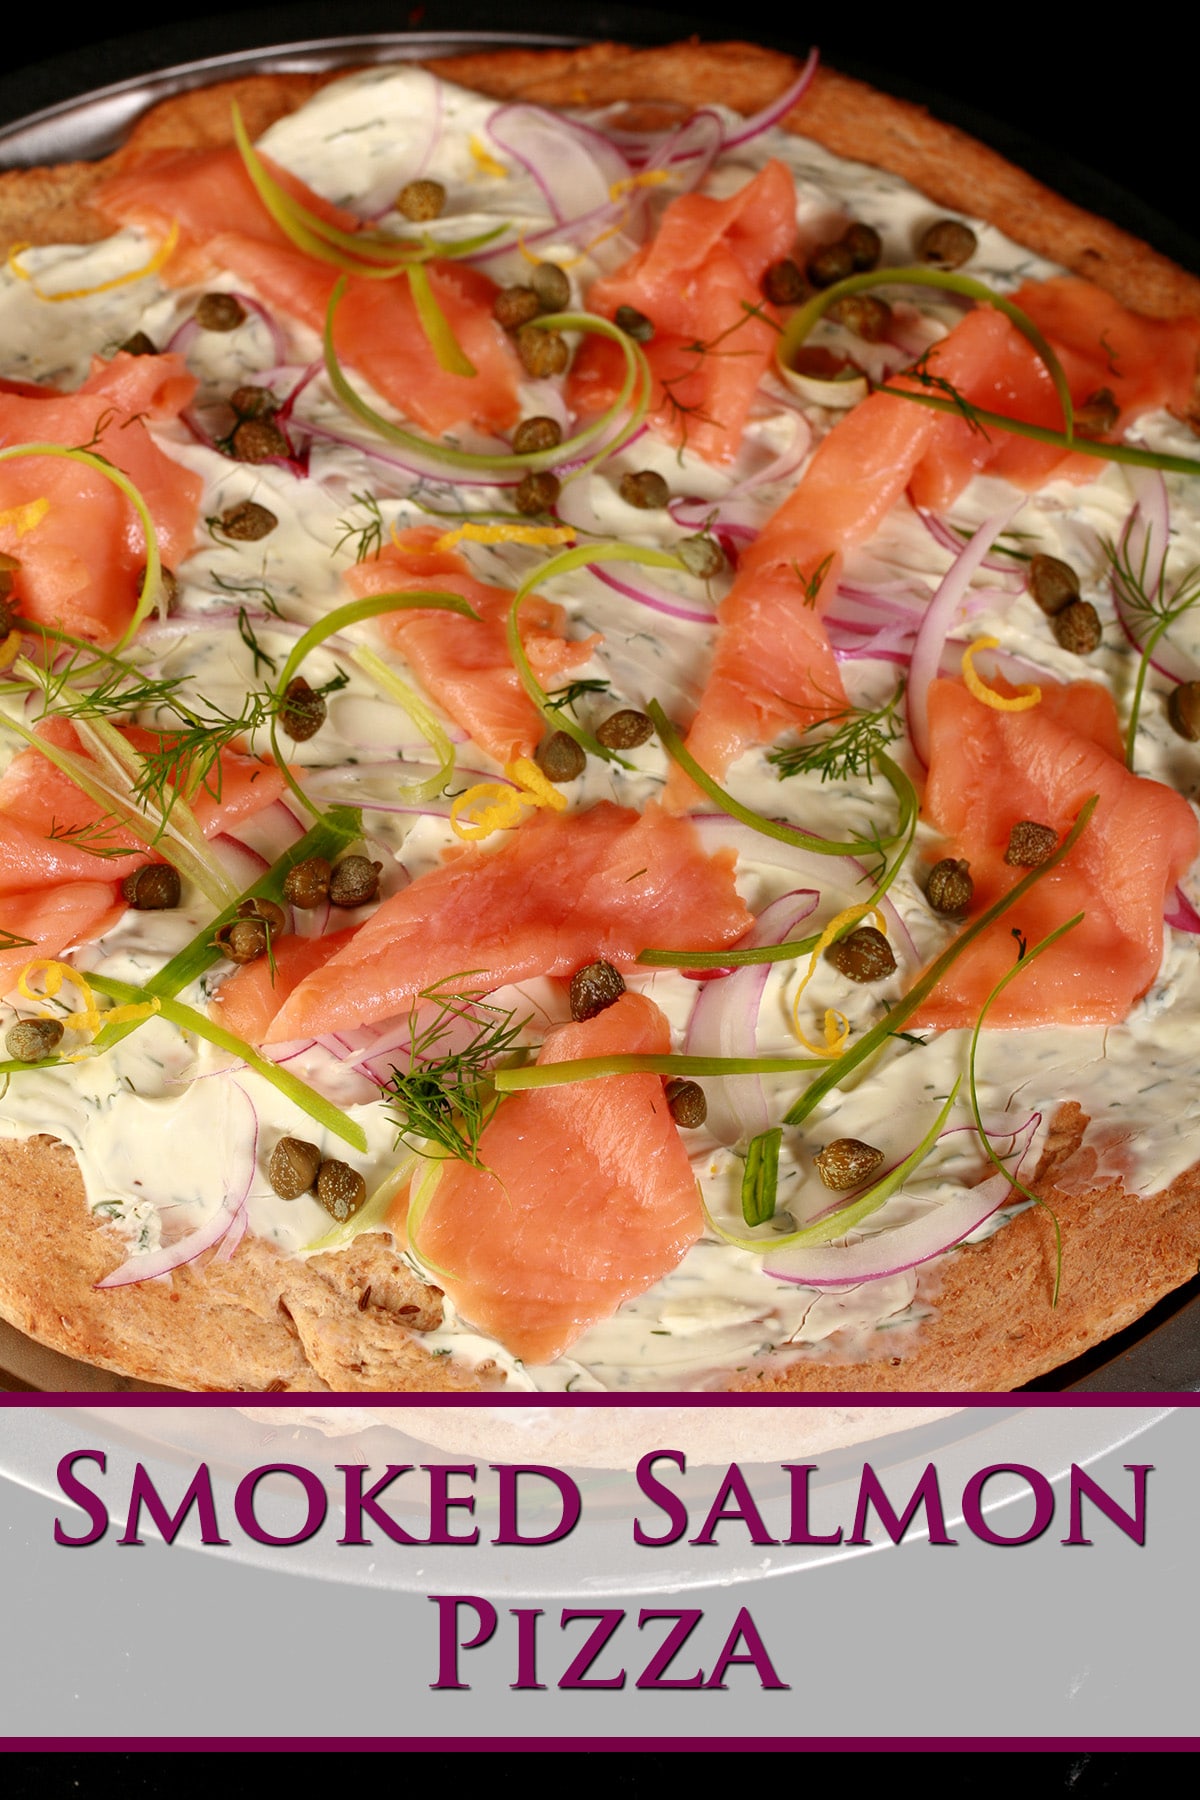 A close up view of smoked salmon pizza. The crust is rye, and it's topped with cream cheese sauce, smoked salmon, and other toppings.